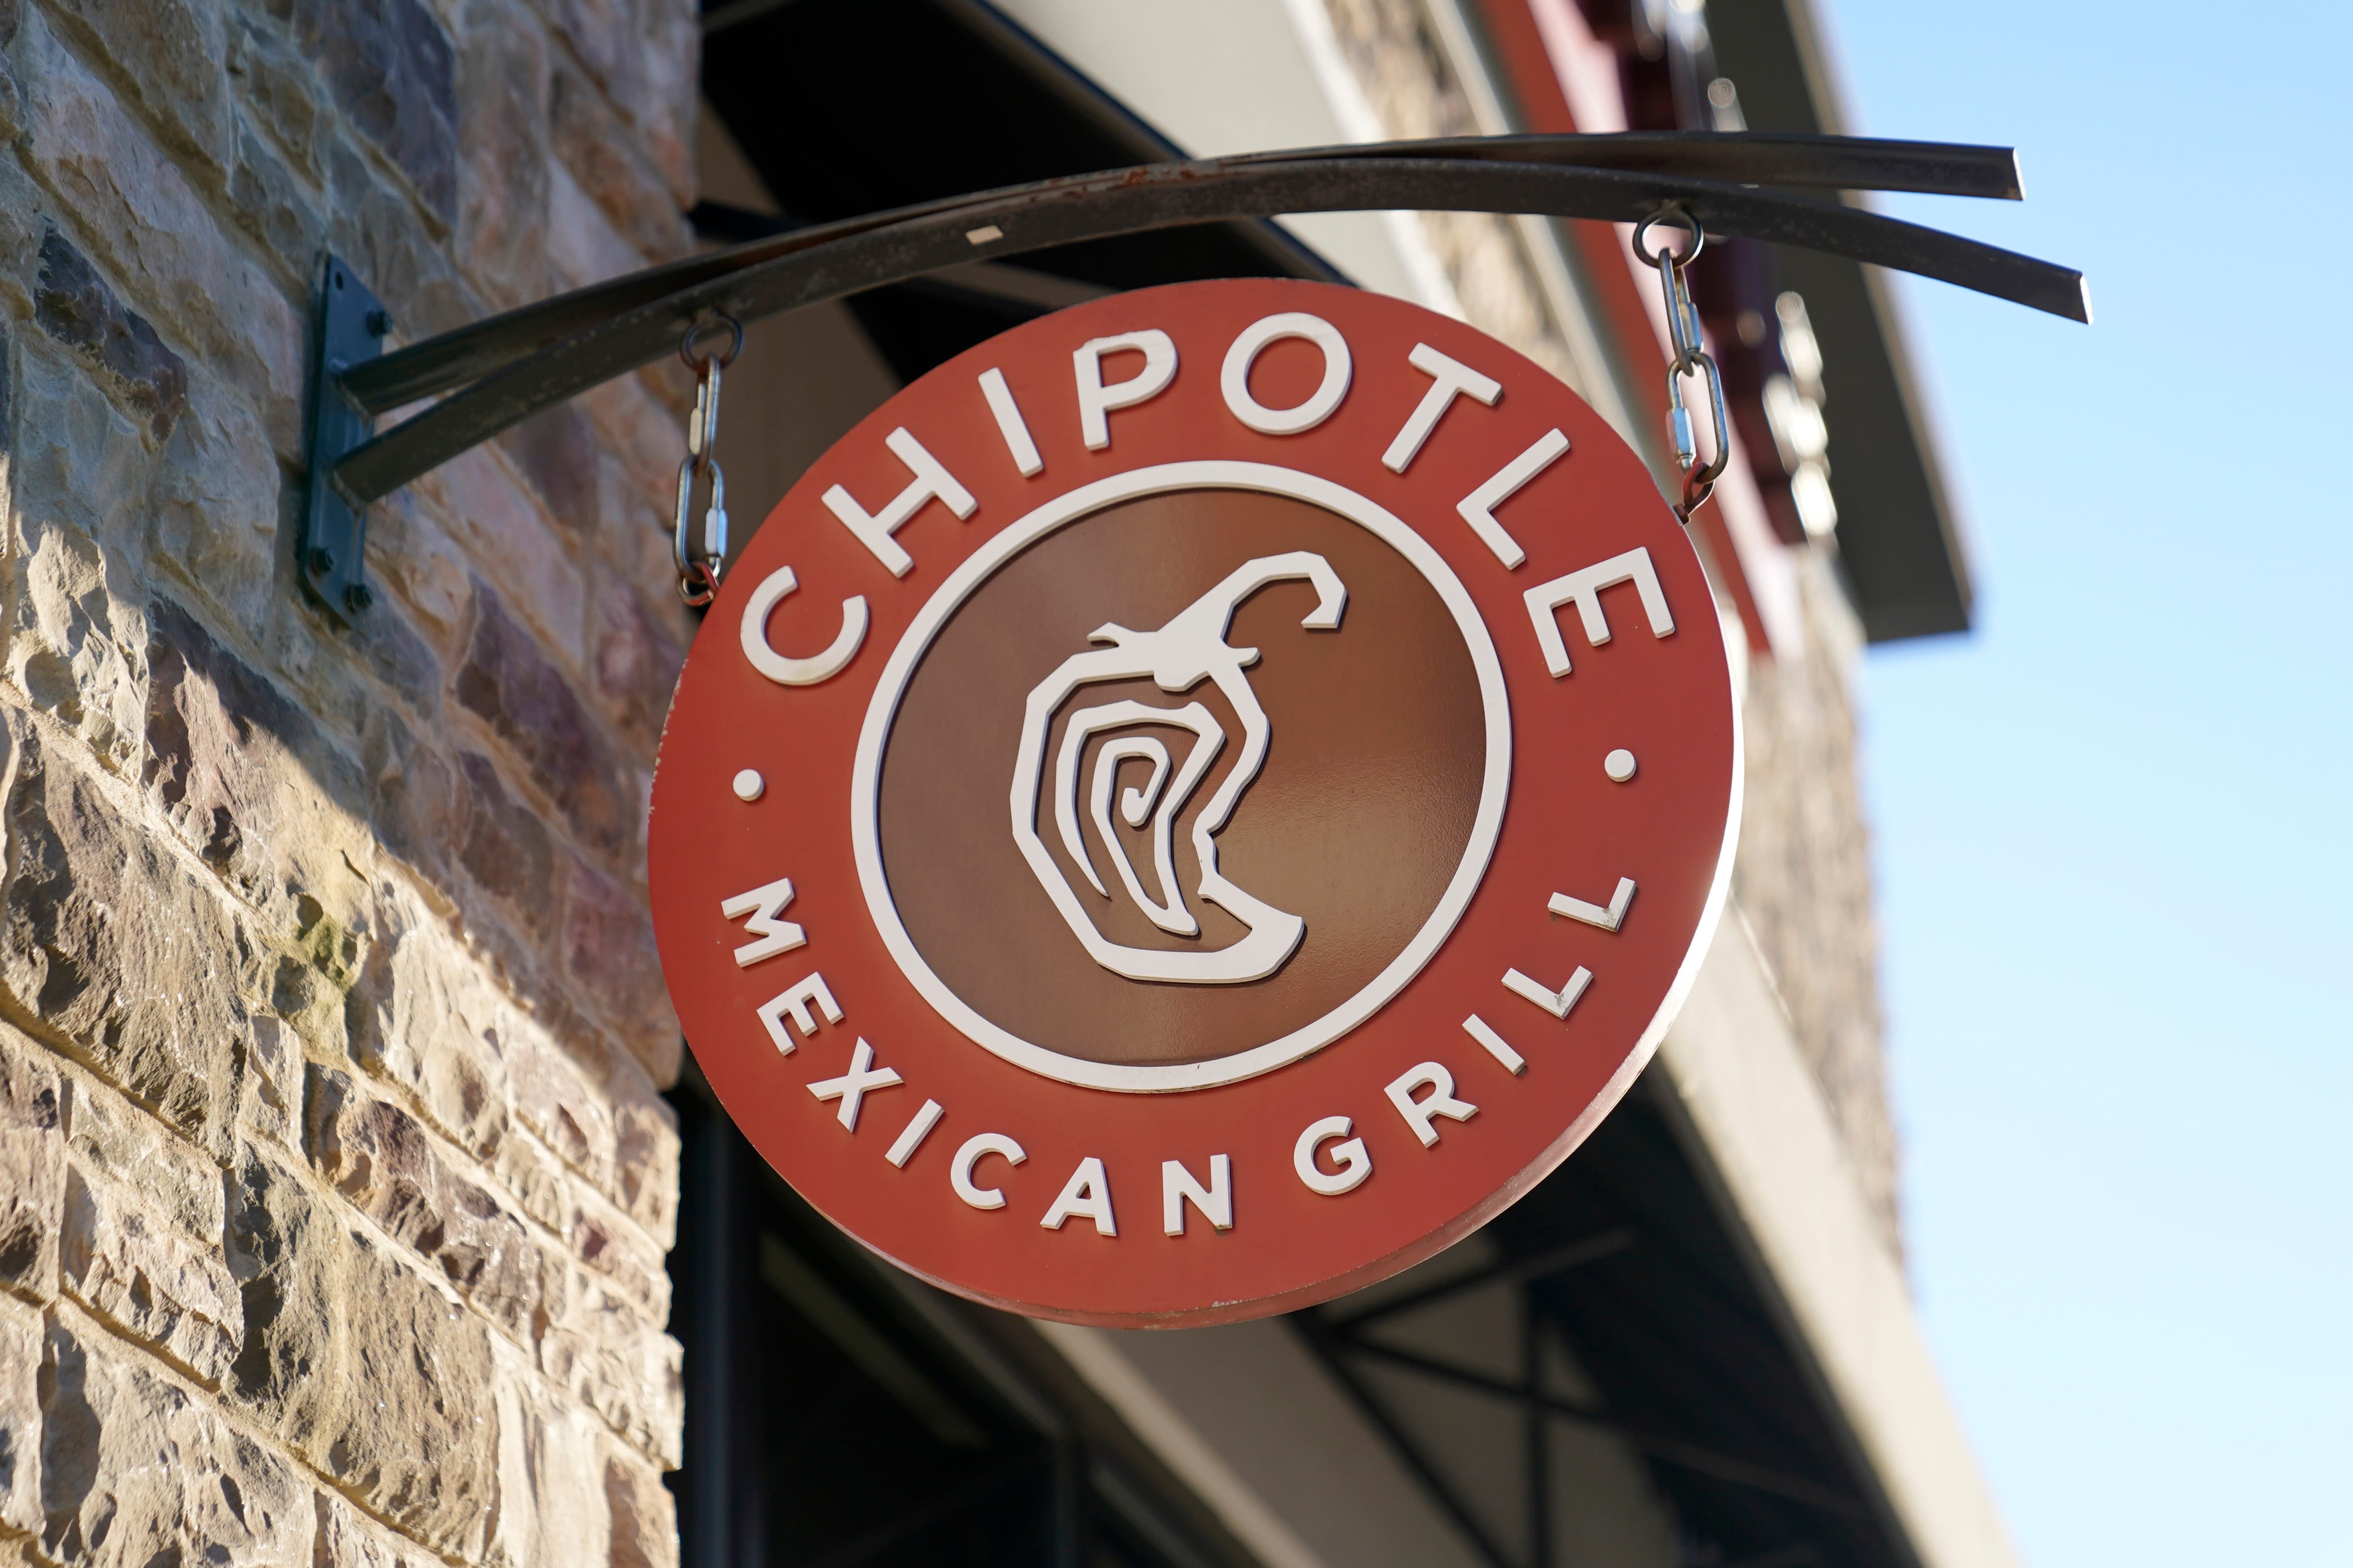 Chipotle portions haven’t shrunk, company says after TikTok backlash